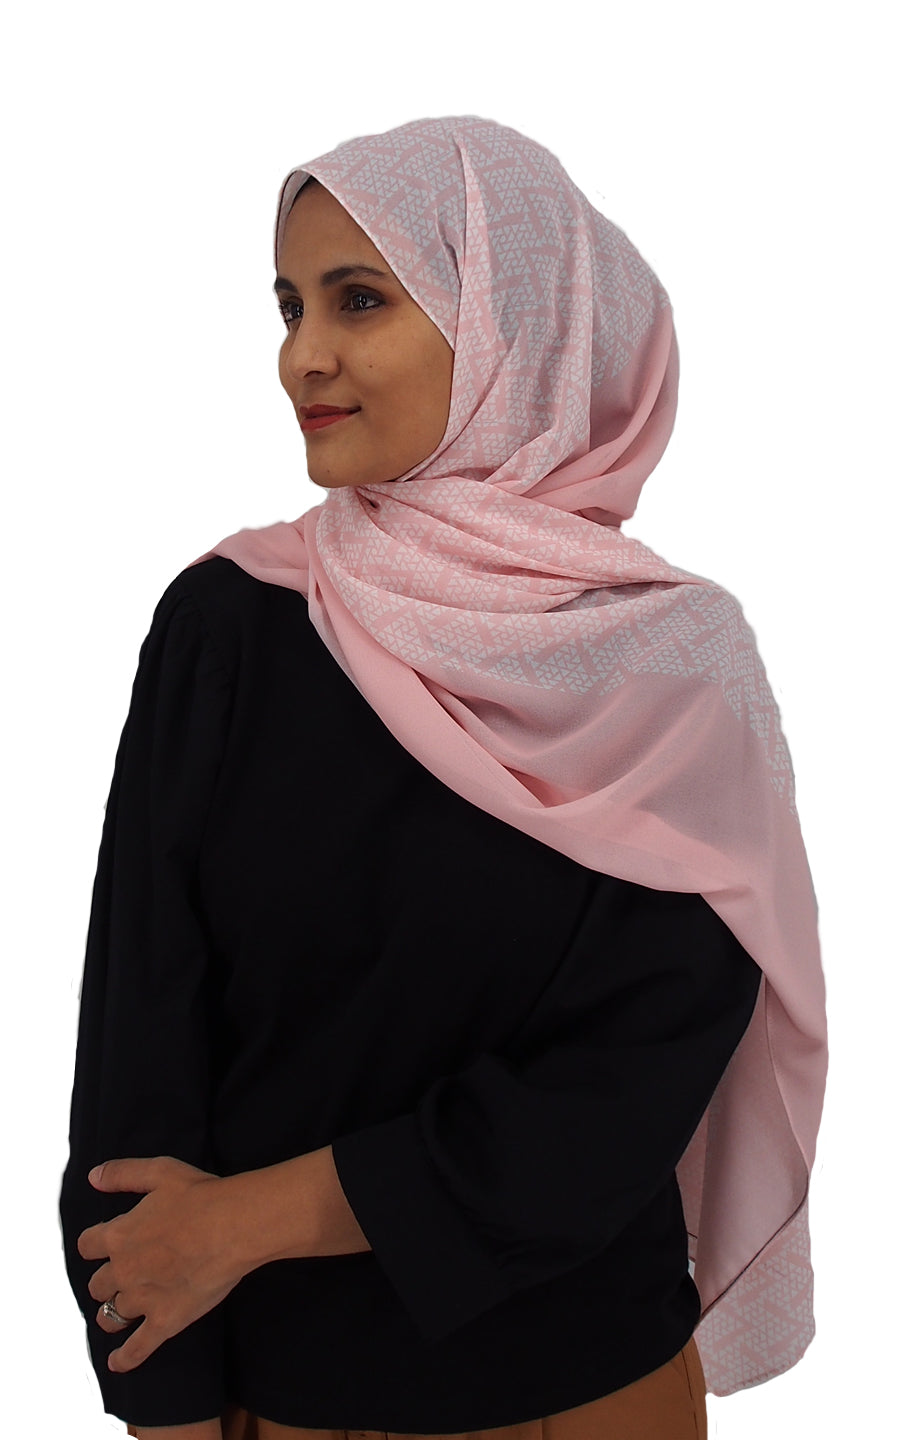 #LSEssential: Pink Row Shawl